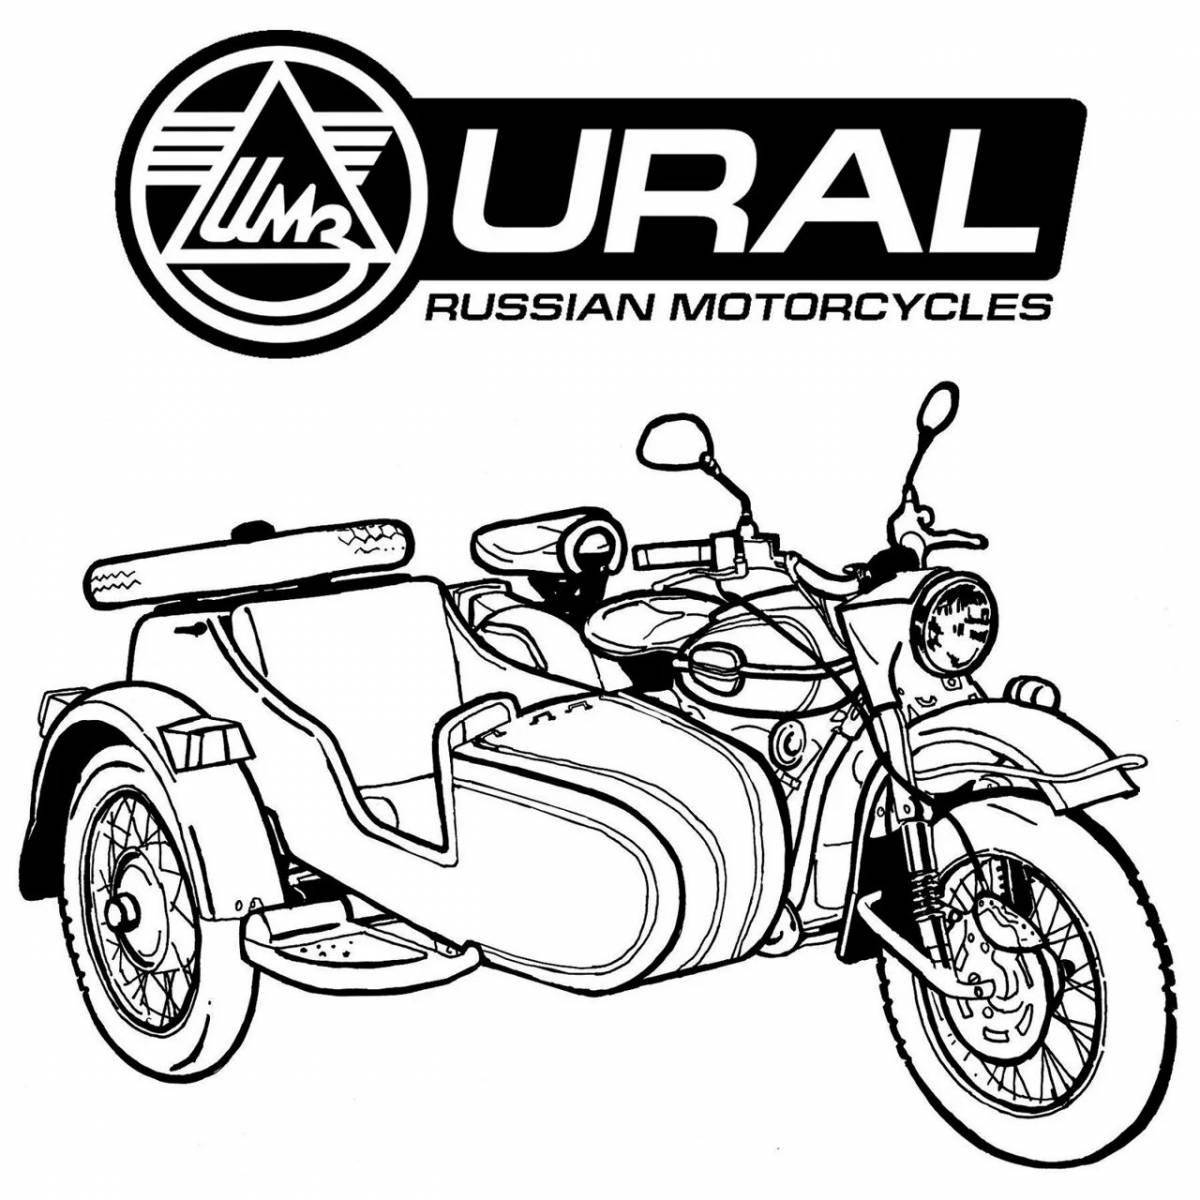 Radiant motorcycle military coloring page